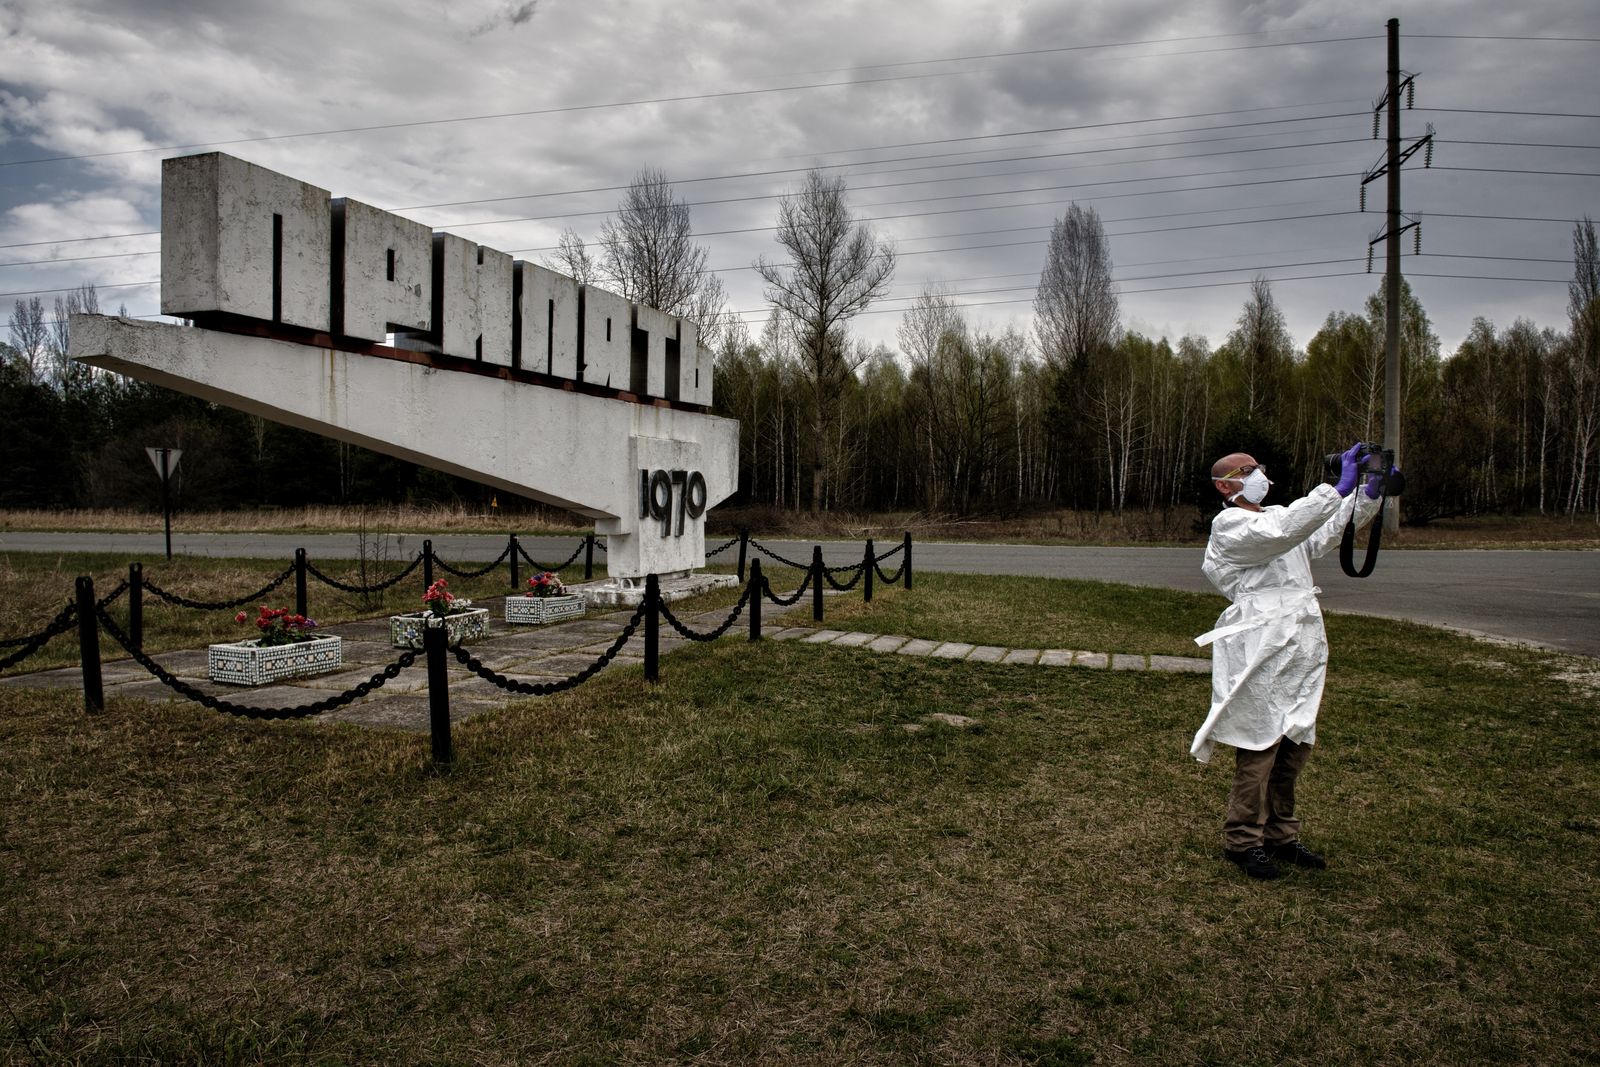 © Pierpaolo Mittica - Image from the Chernobyl Fractures photography project